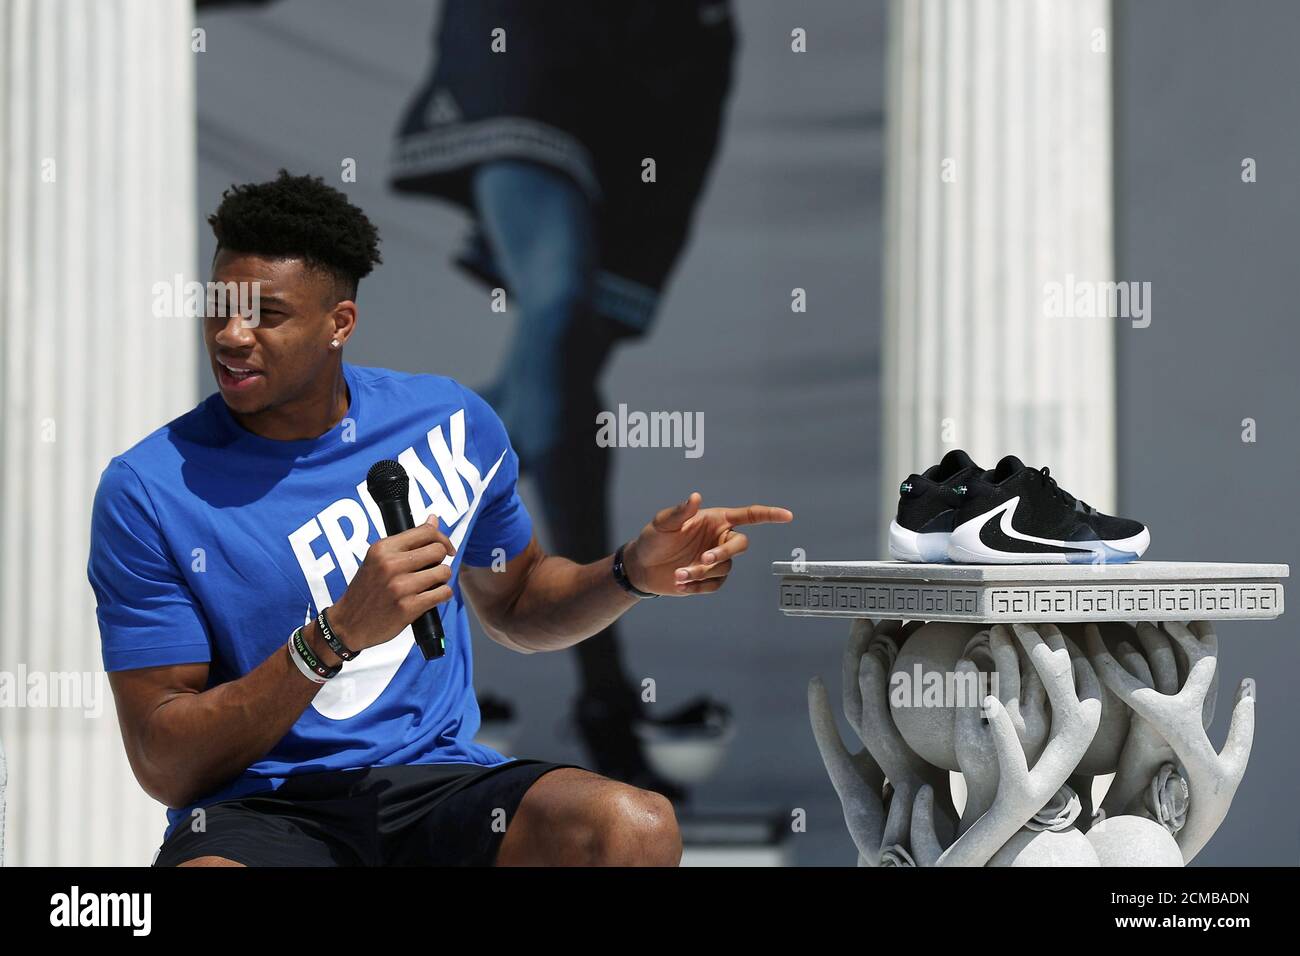 REFILE - CORRECTING STYLE Milwaukee Bucks forward and NBA's MVP Giannis  Antetokounmpo speaks during an official presentation event of a Nike Shoe,  in Athens, Greece June 28, 2019. REUTERS/Costas Baltas Stock Photo - Alamy